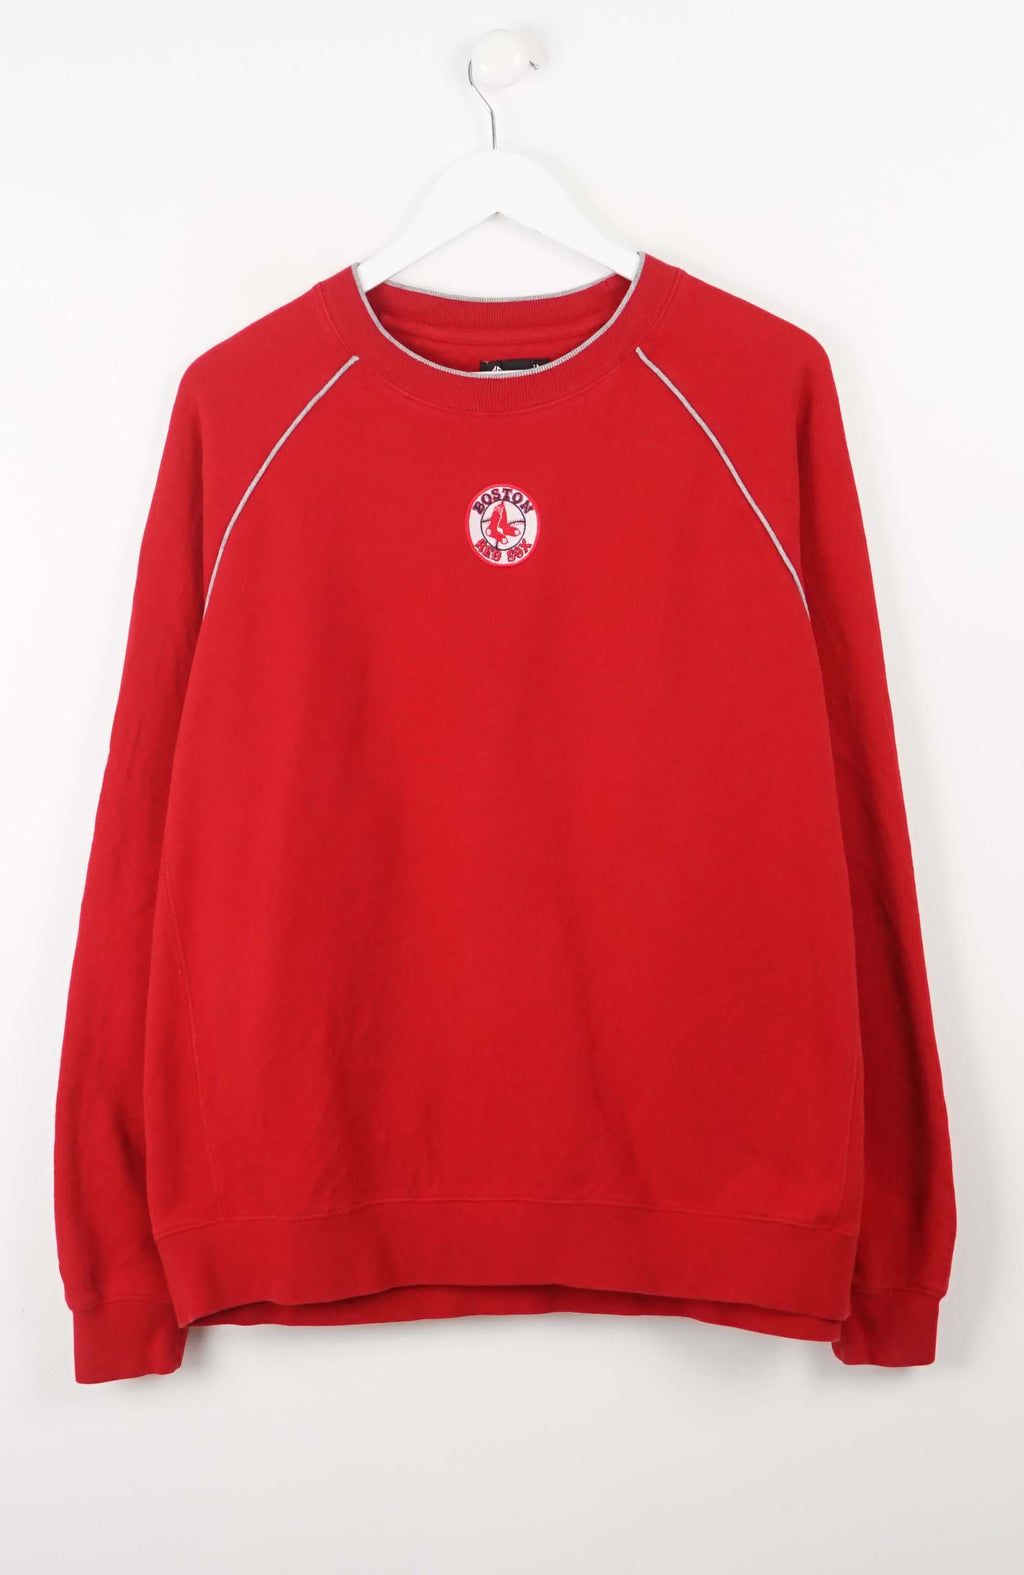 VINTAGE BOSTON RED SOX SWEATER (L)